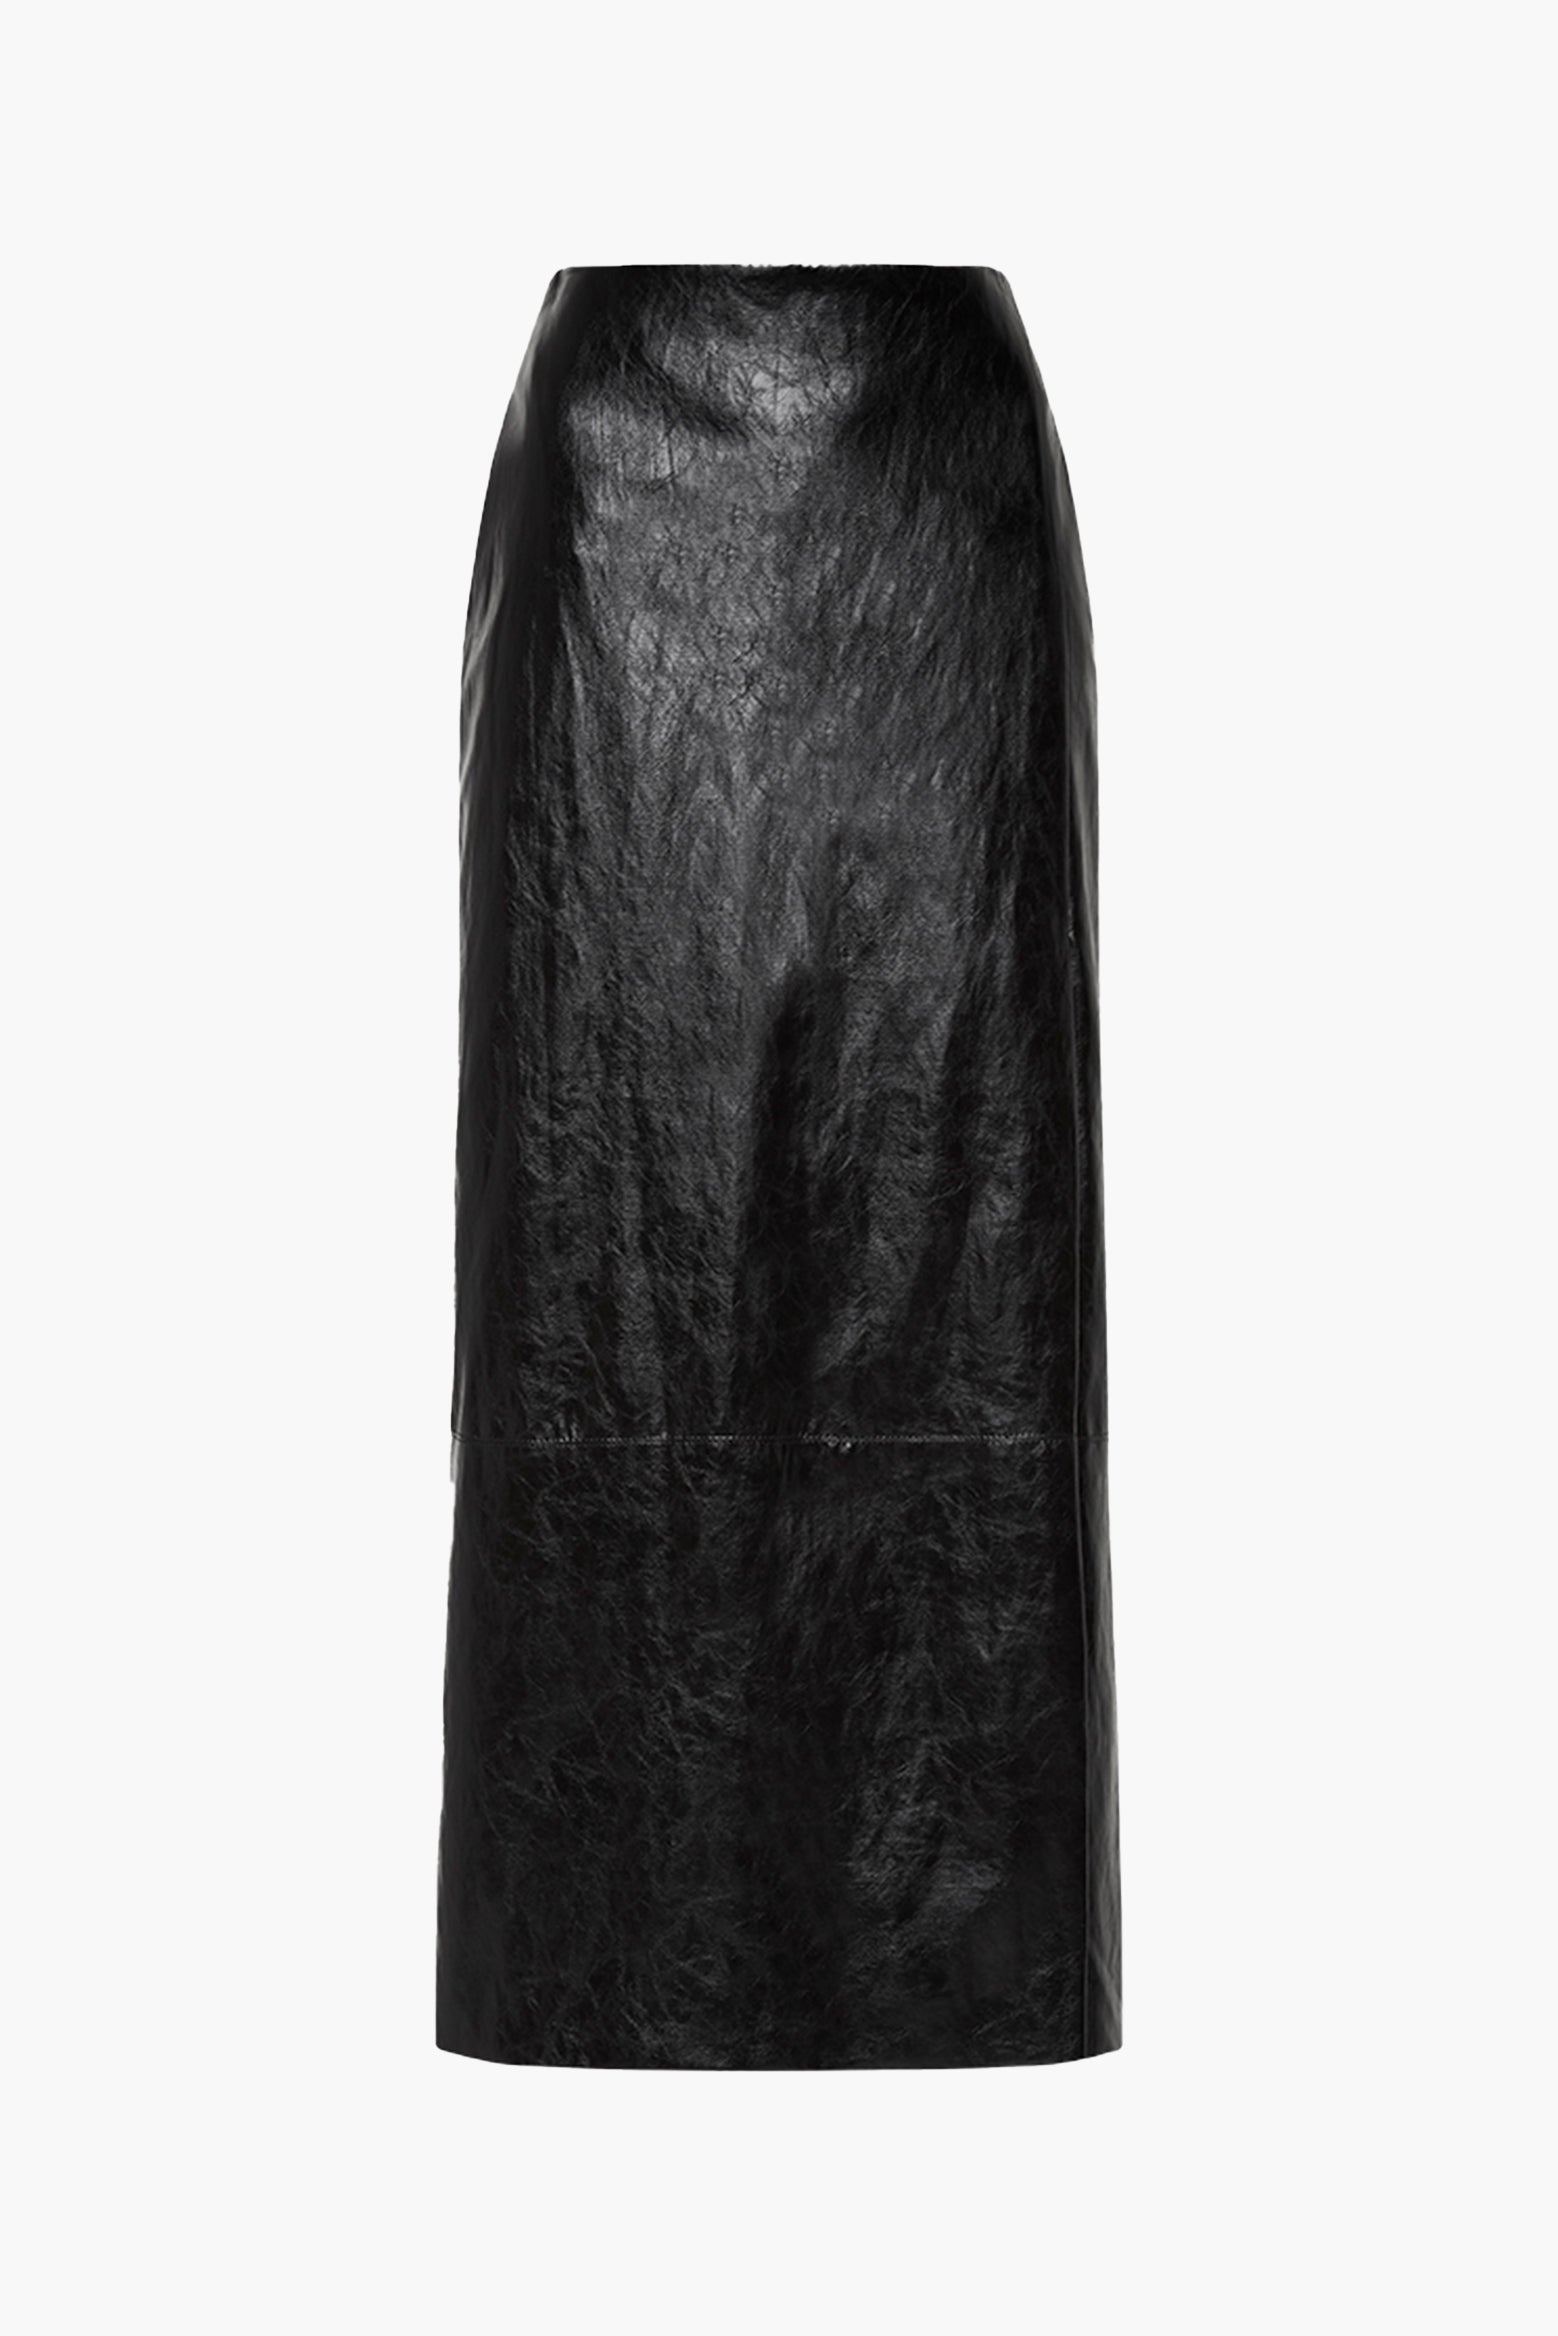 Esse Milos Skirt in Black available at The New Trend Australia.